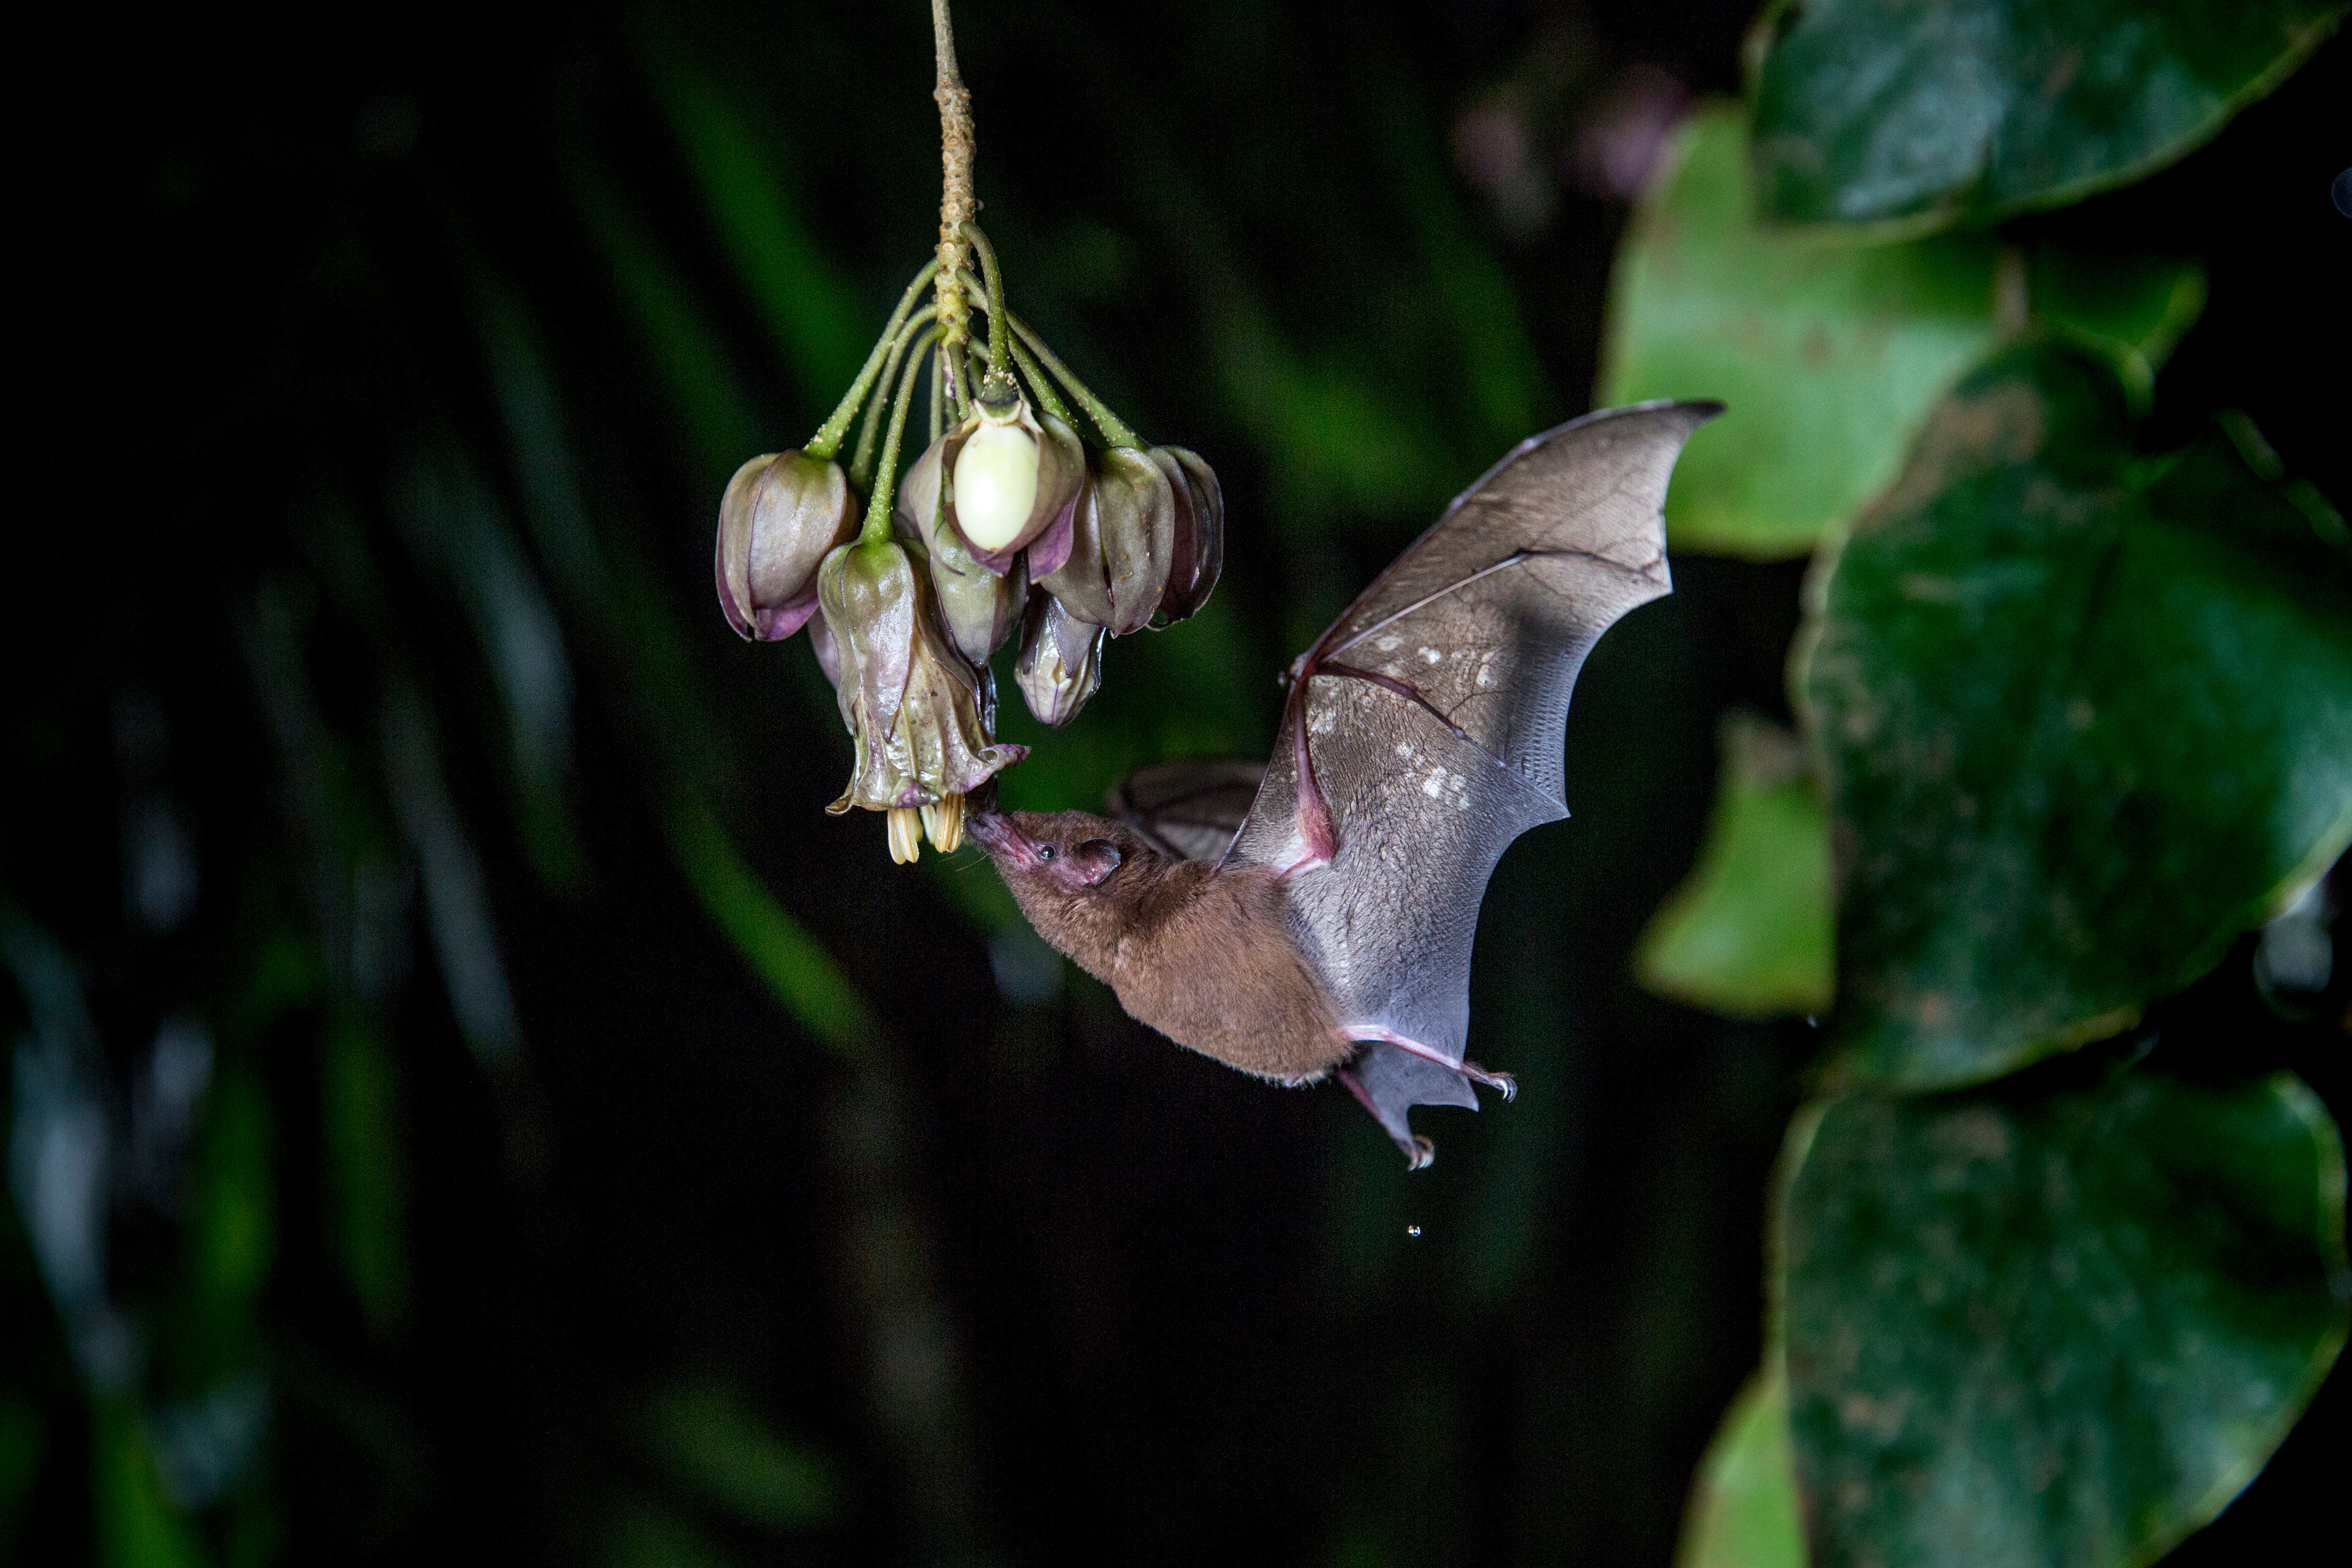 The Underwood's Long-tongued Bat pollinating the '7-hour flower'